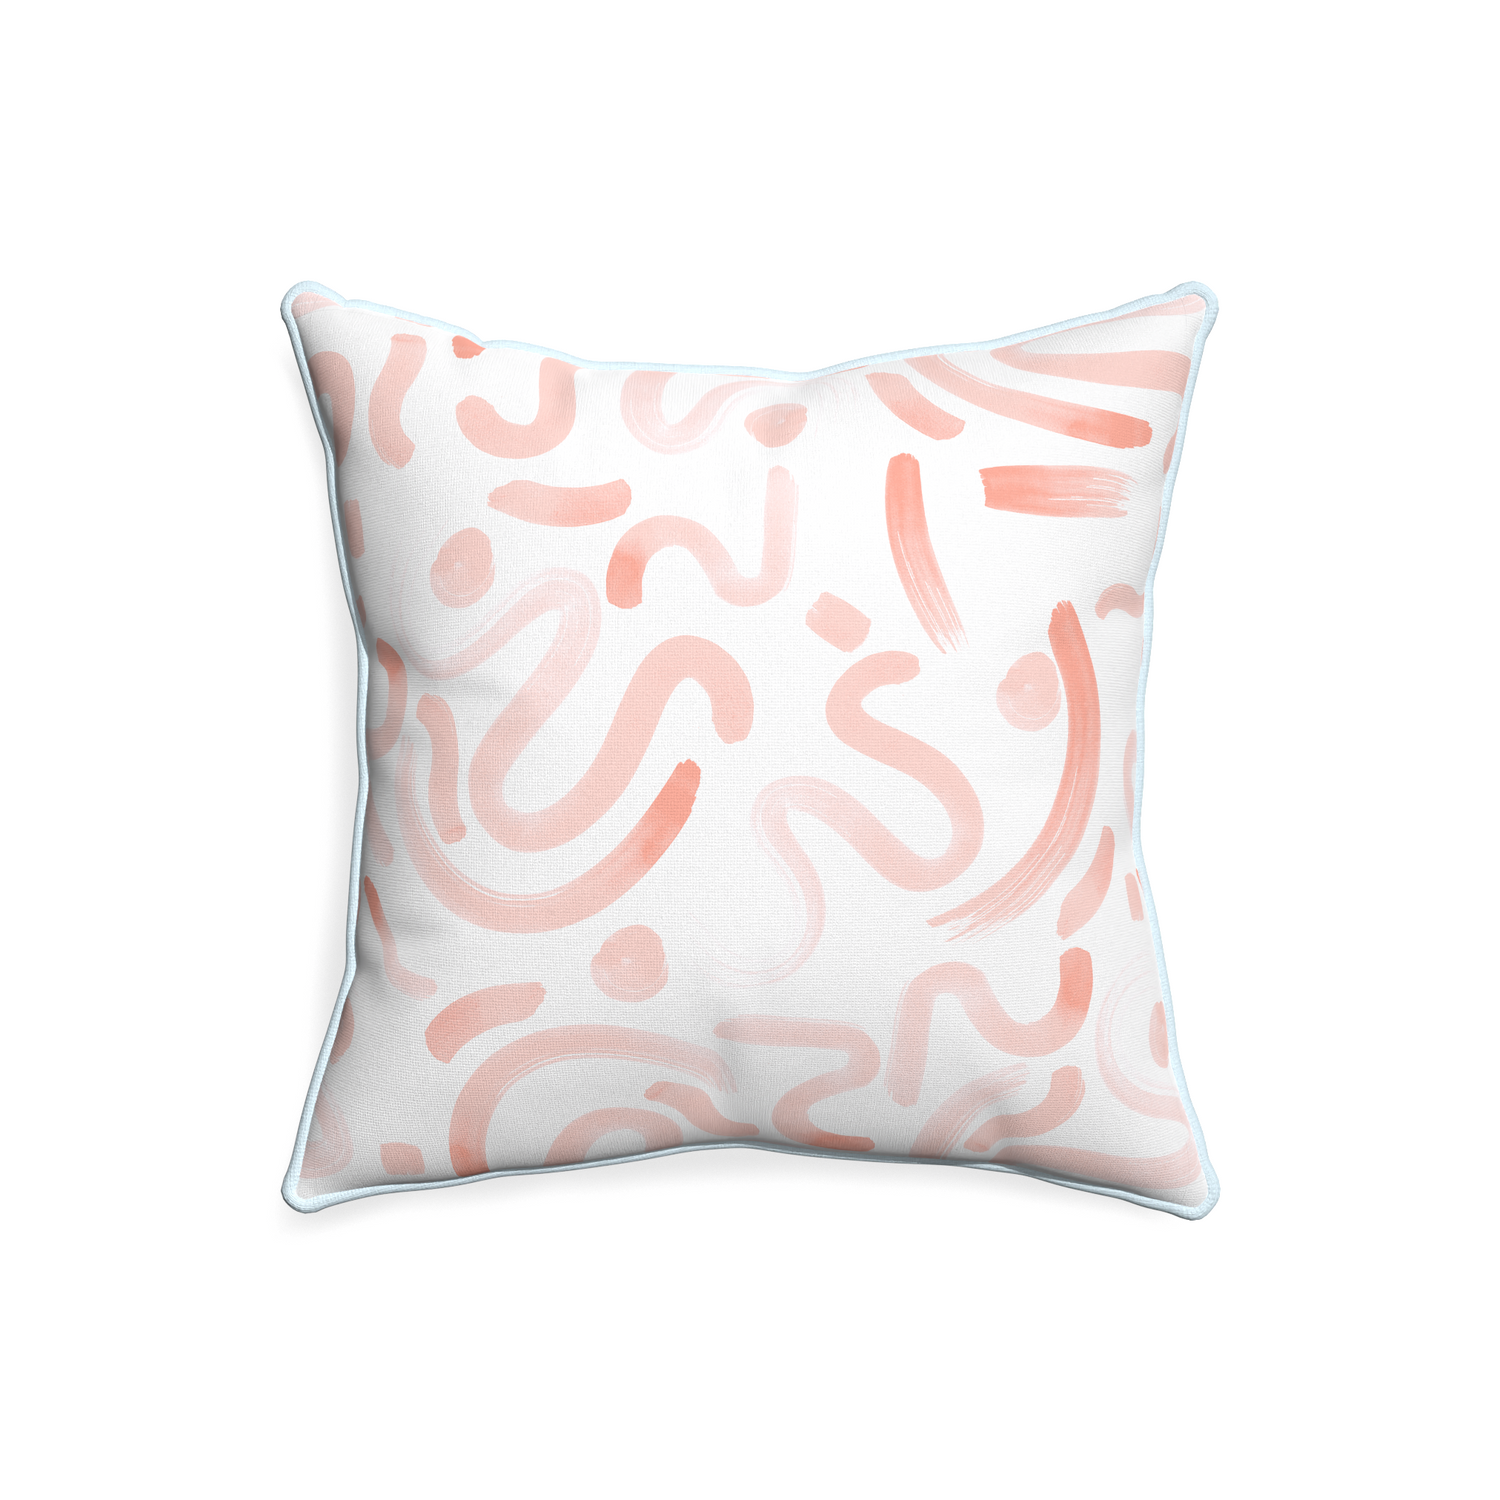 20-square hockney pink custom pillow with powder piping on white background